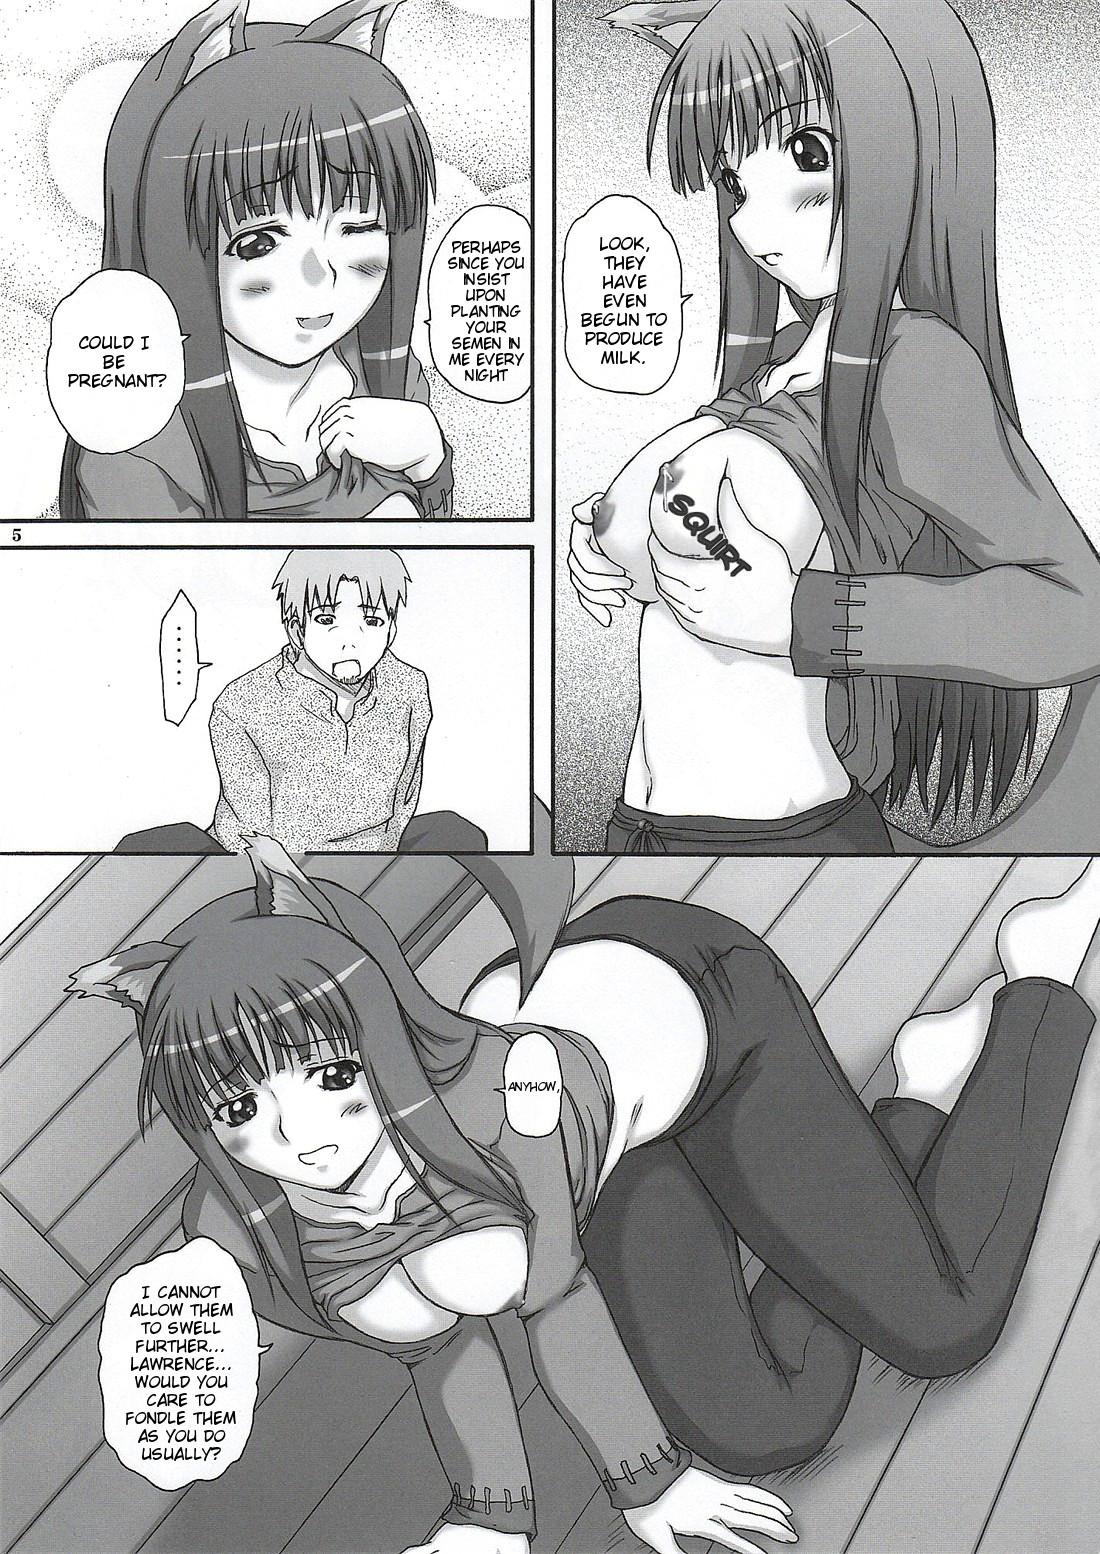 Cojiendo 2Stroke TY - Spice and wolf Stepsister - Page 4